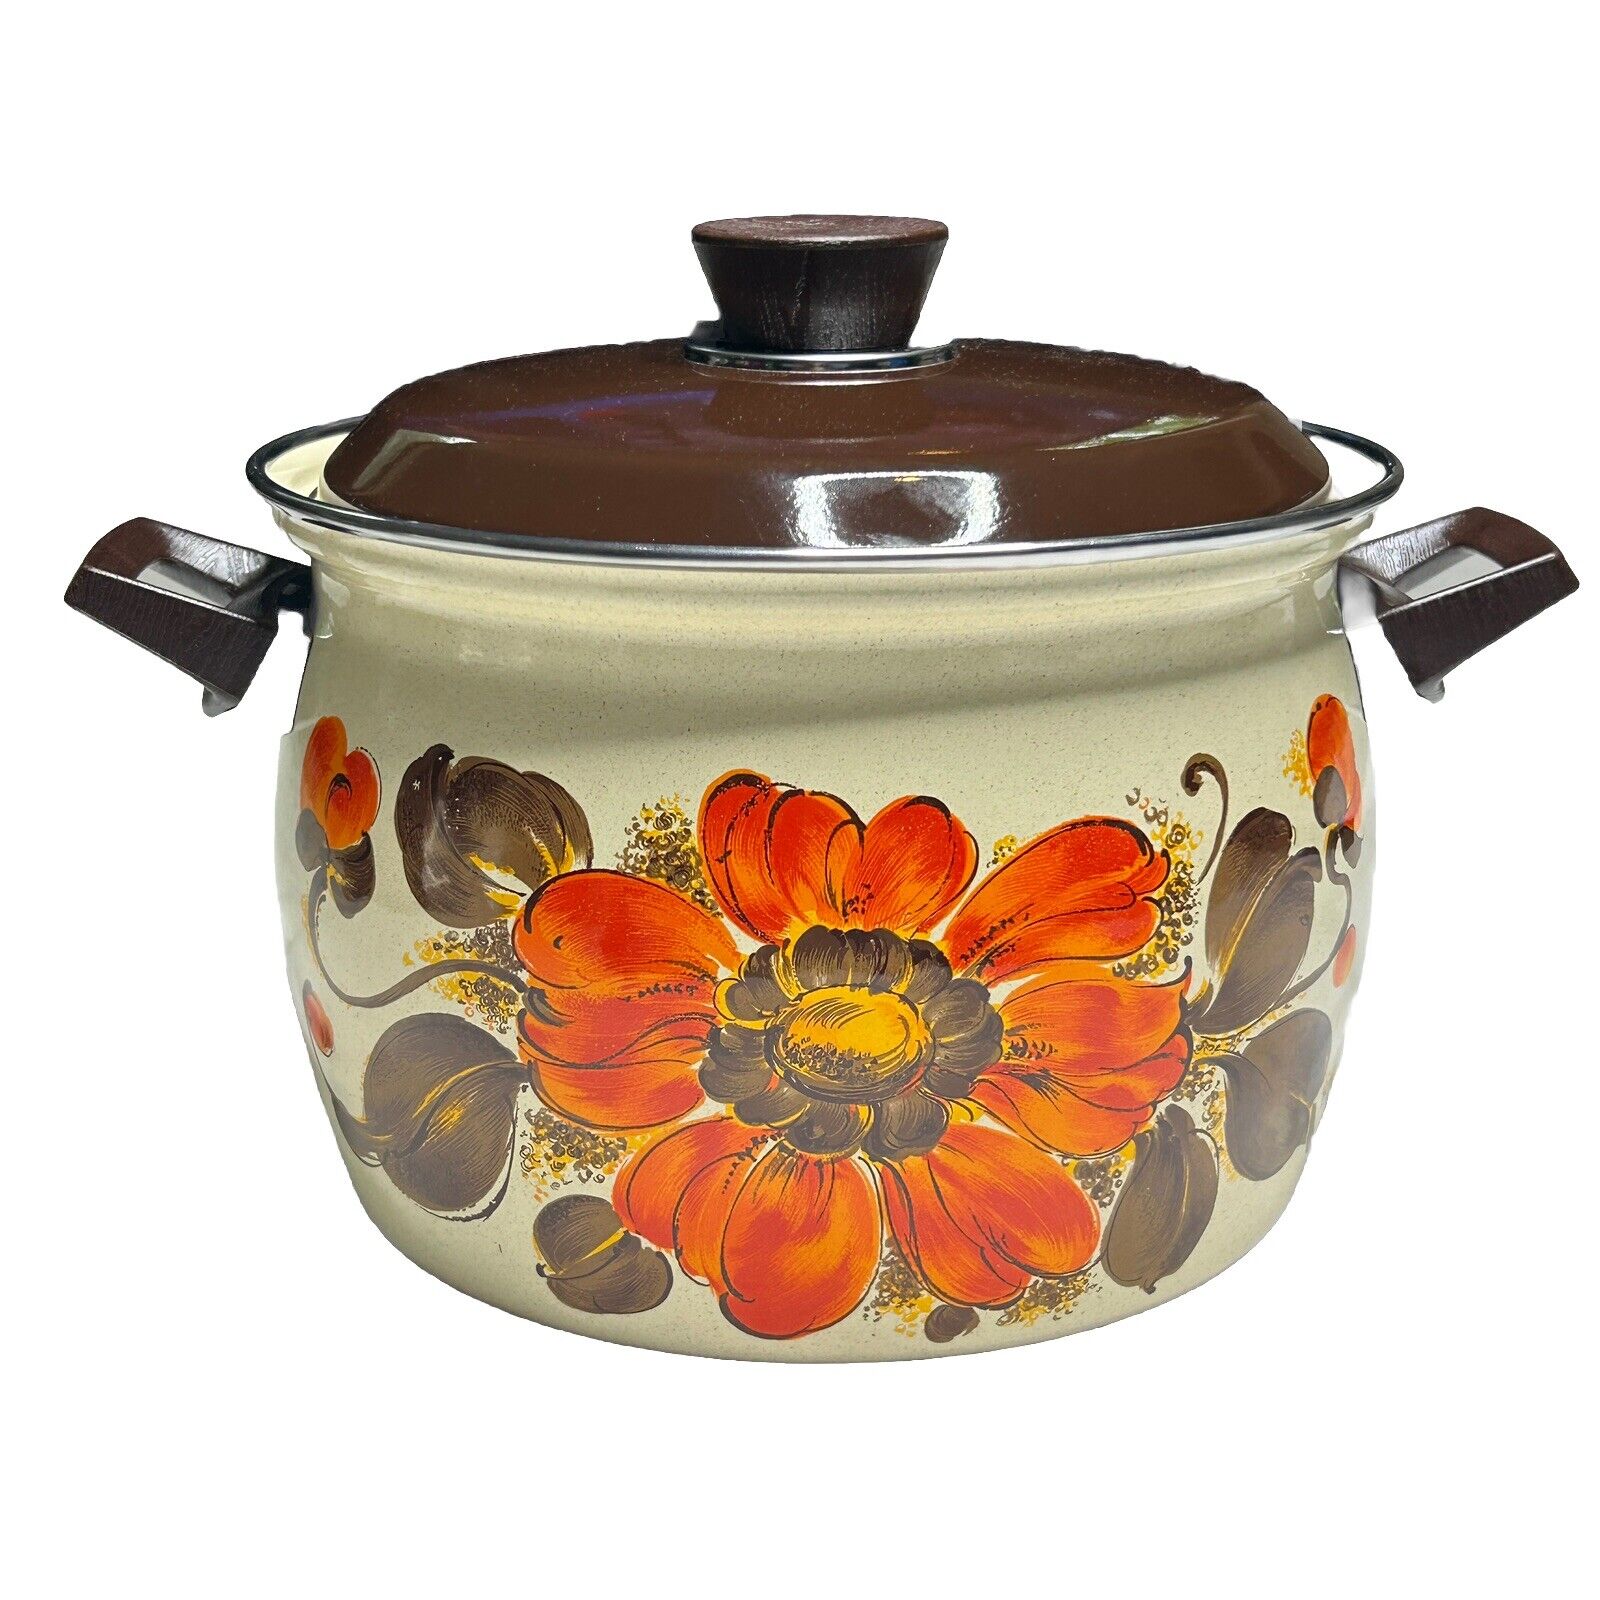 Vintage Moneta 22 Stock Pot W/ Lid Floral Made in Italy Enamel Cookware